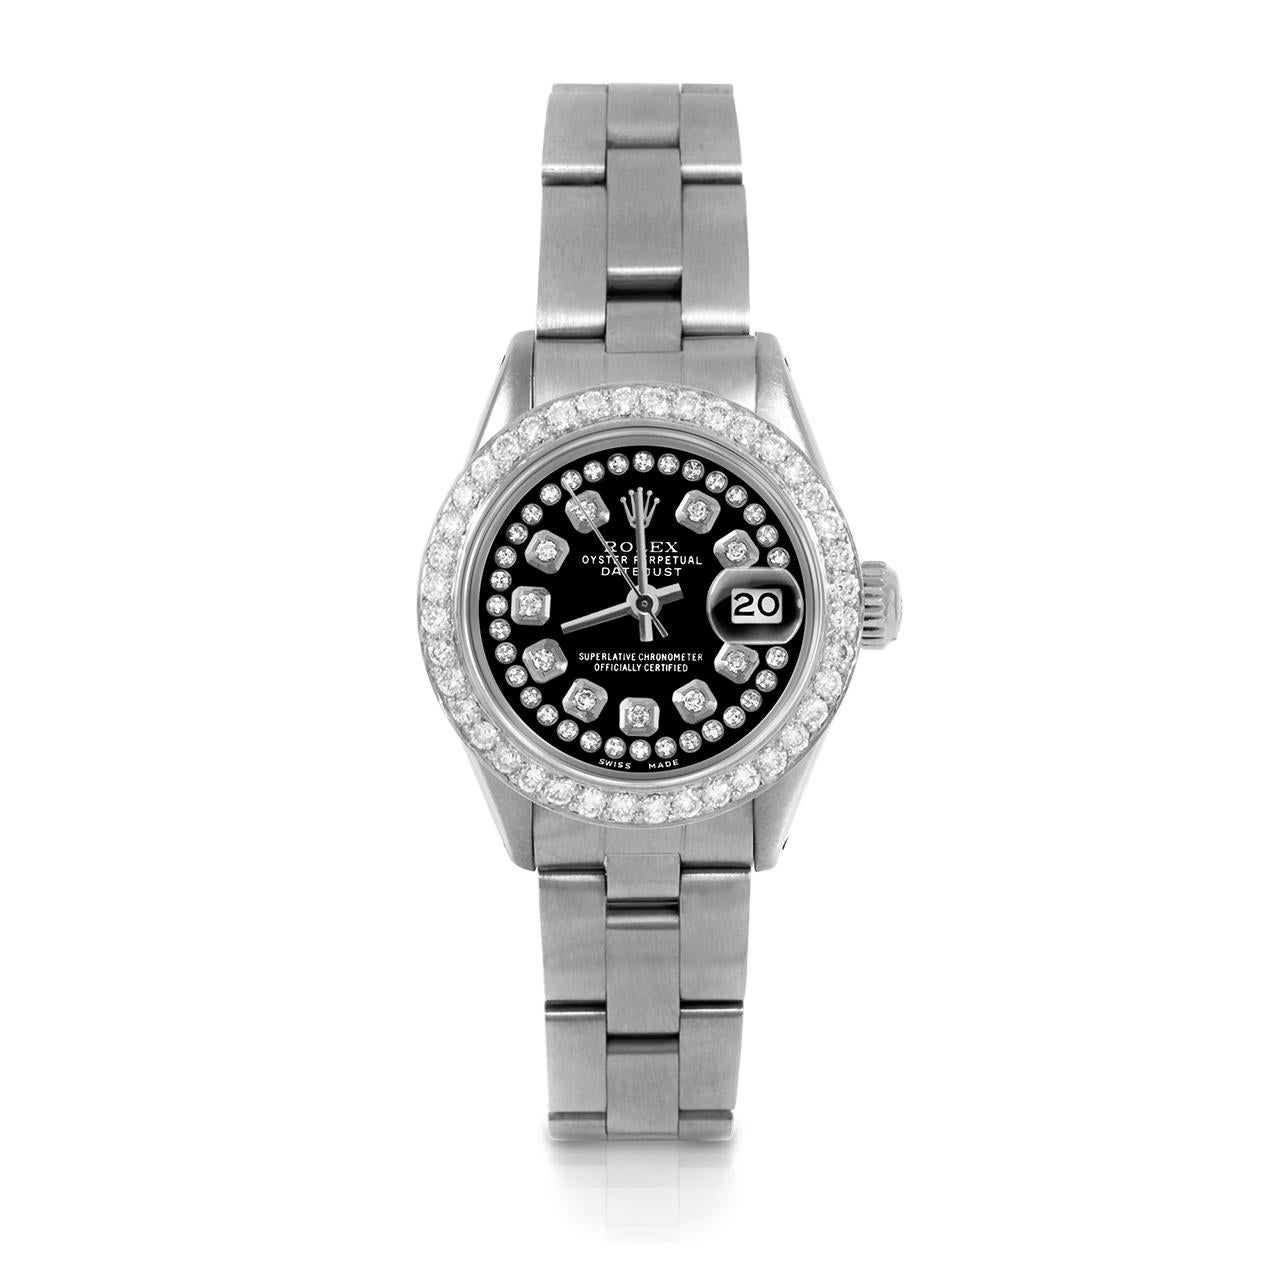 Pre-Owned Rolex 6917 Ladies 26mm Datejust Watch, Custom Black String Diamond Dial & Custom 1ct Diamond Bezel on Rolex Stainless Steel Oyster Band.   

SKU 6917-SS-BLK-STRD-BDS-OYS


Brand/Model:        Rolex Datejust
Model Number:        6917
Style: